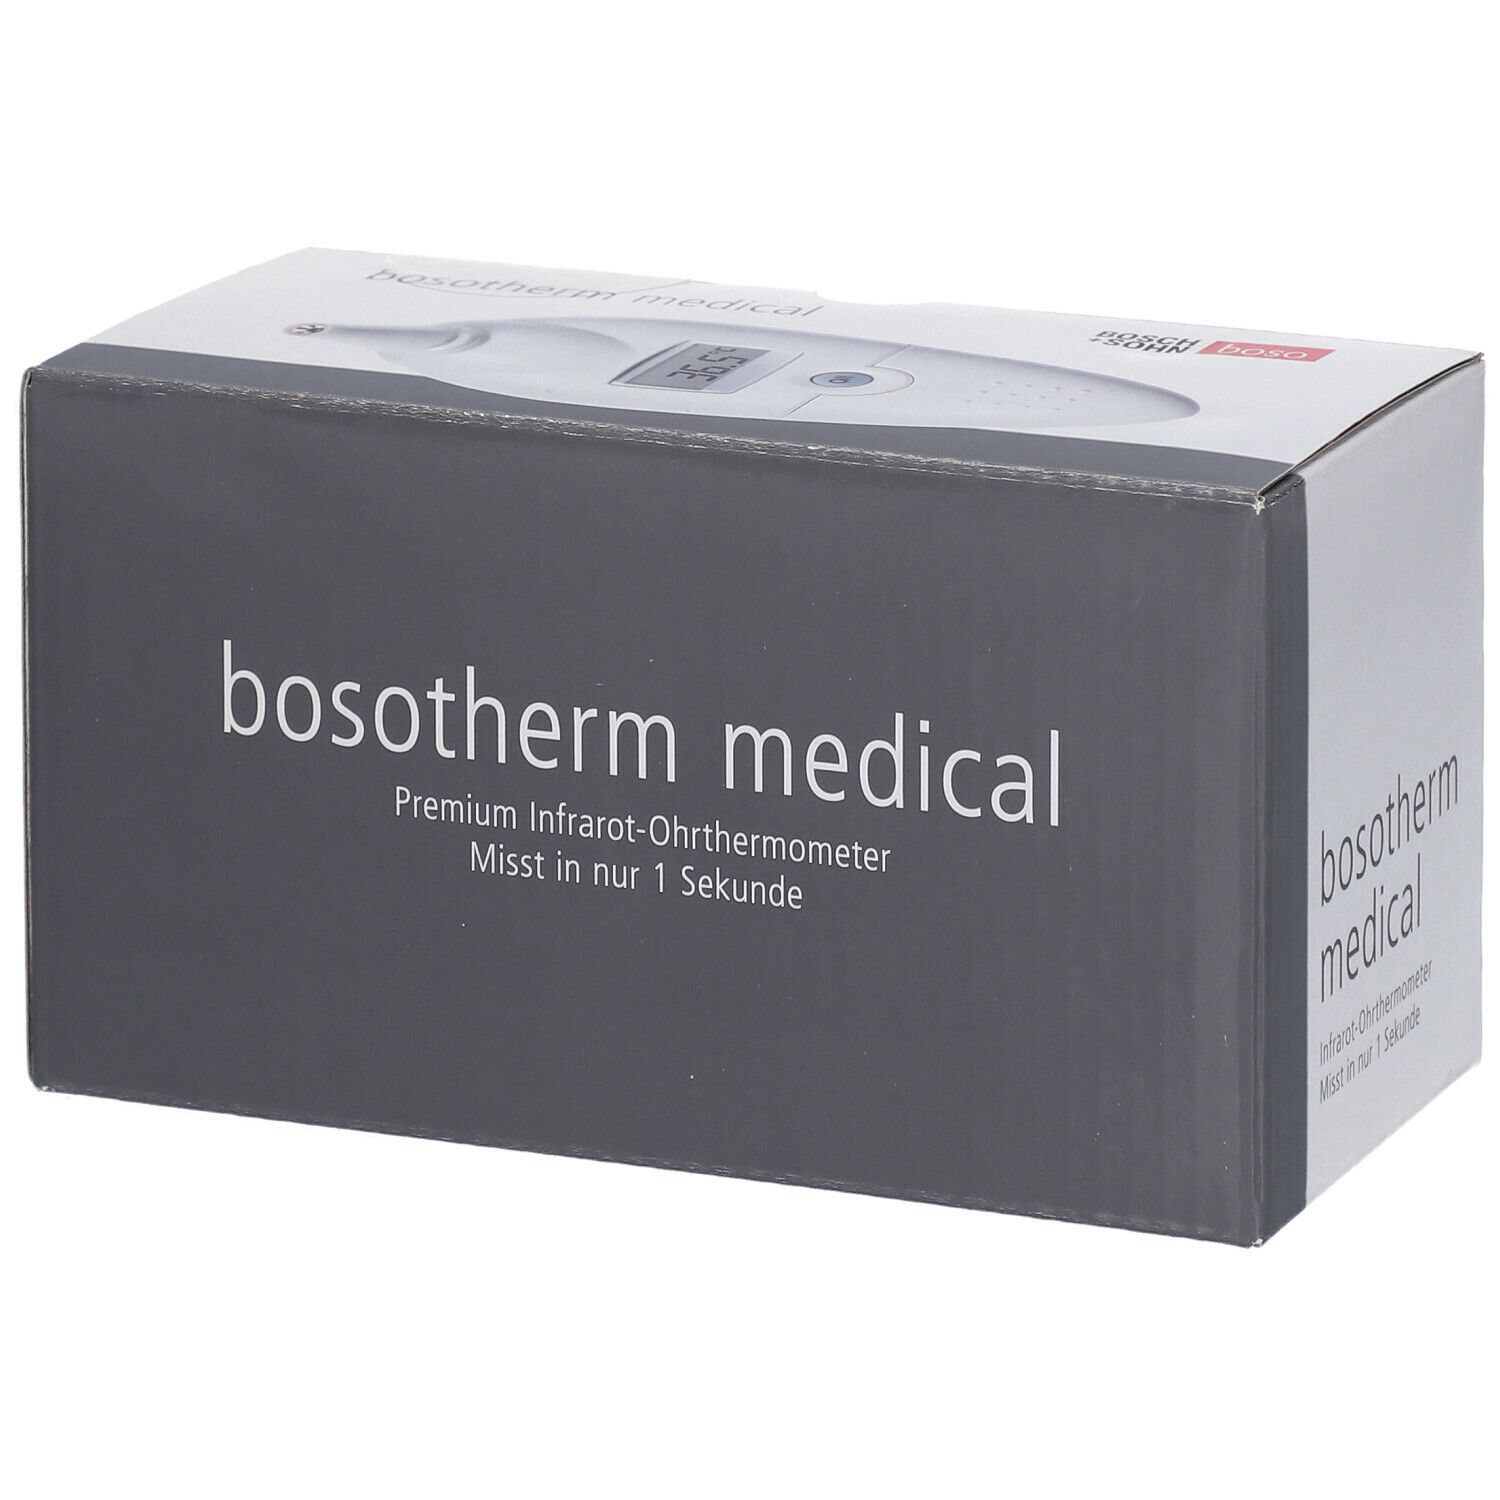 bosotherm medical Infrarot Ohr-Thermometer